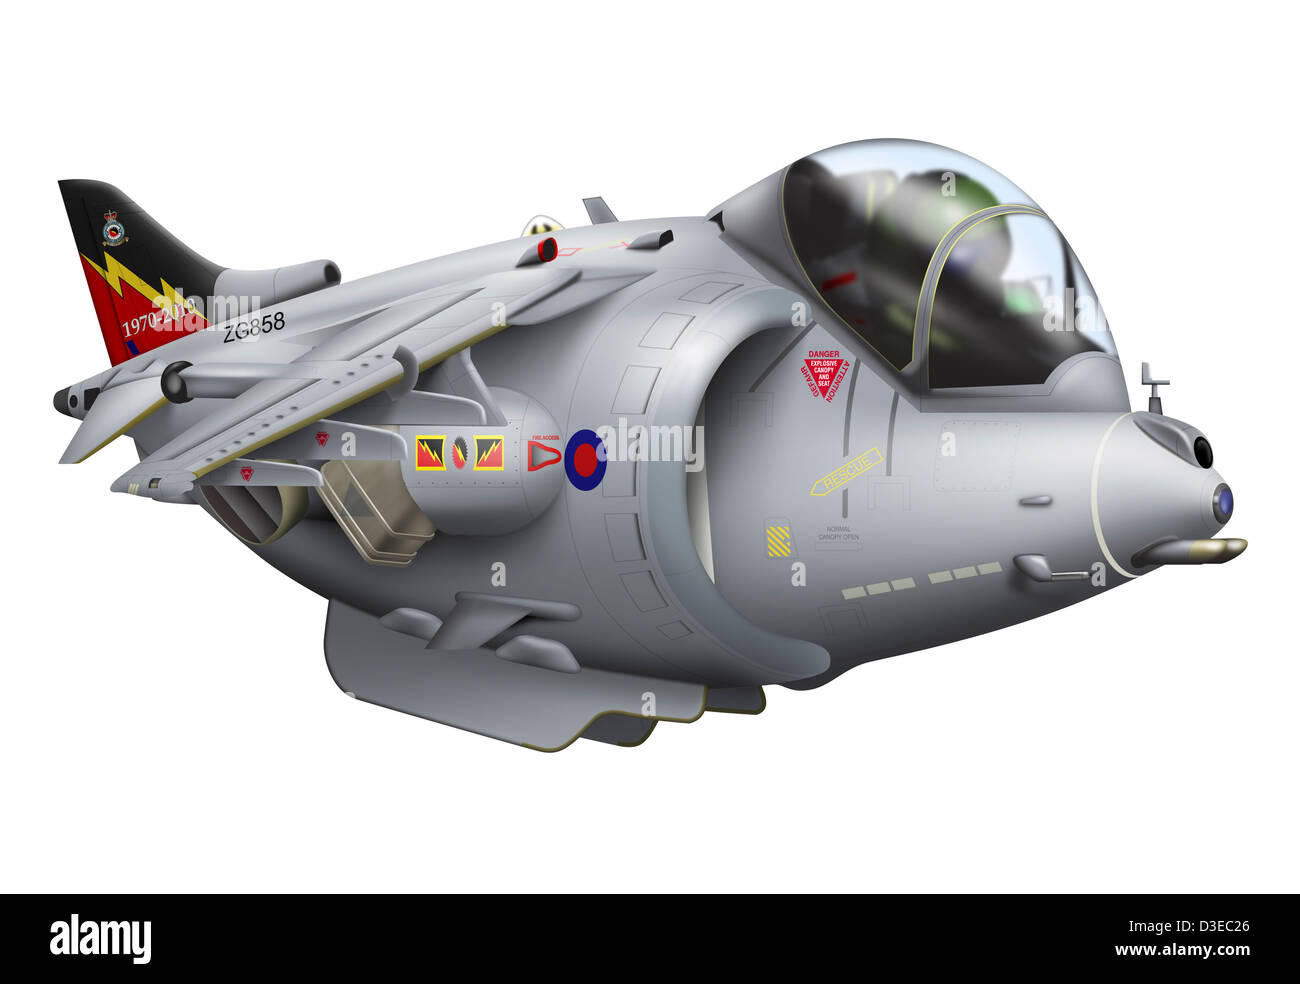 Cartoon illustration of a Royal Air Force Harrier jet plane. Stock Photo